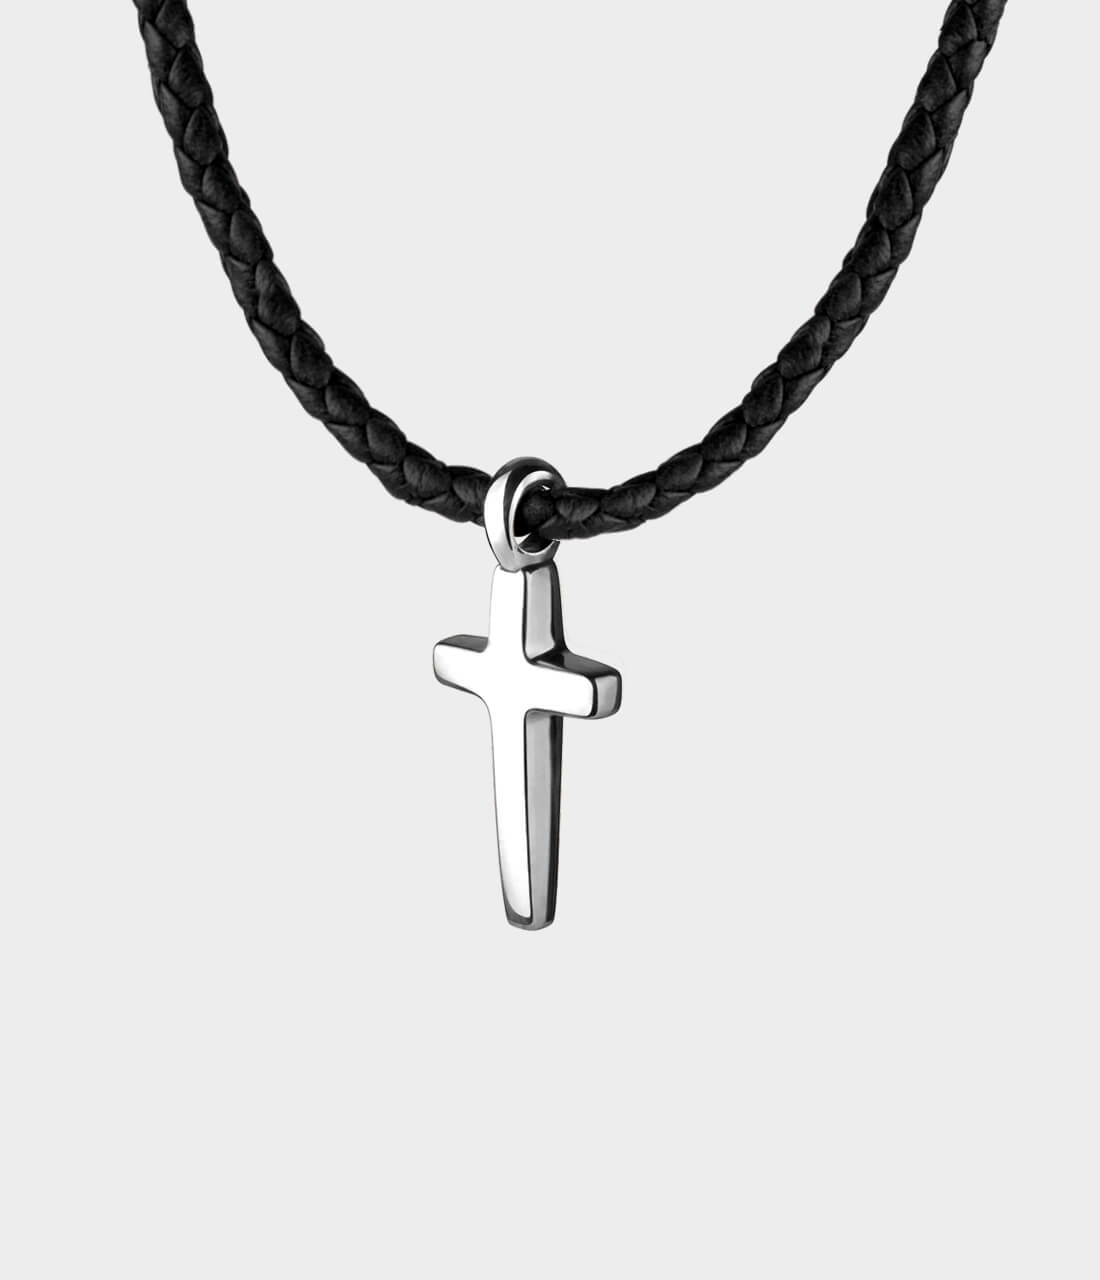 Buy Men Cross Necklace, Black Leather Necklace, Golden Cross Pendant,  Christian Jewelry, Leather Jewelry, Boyfriend Gift Online in India - Etsy